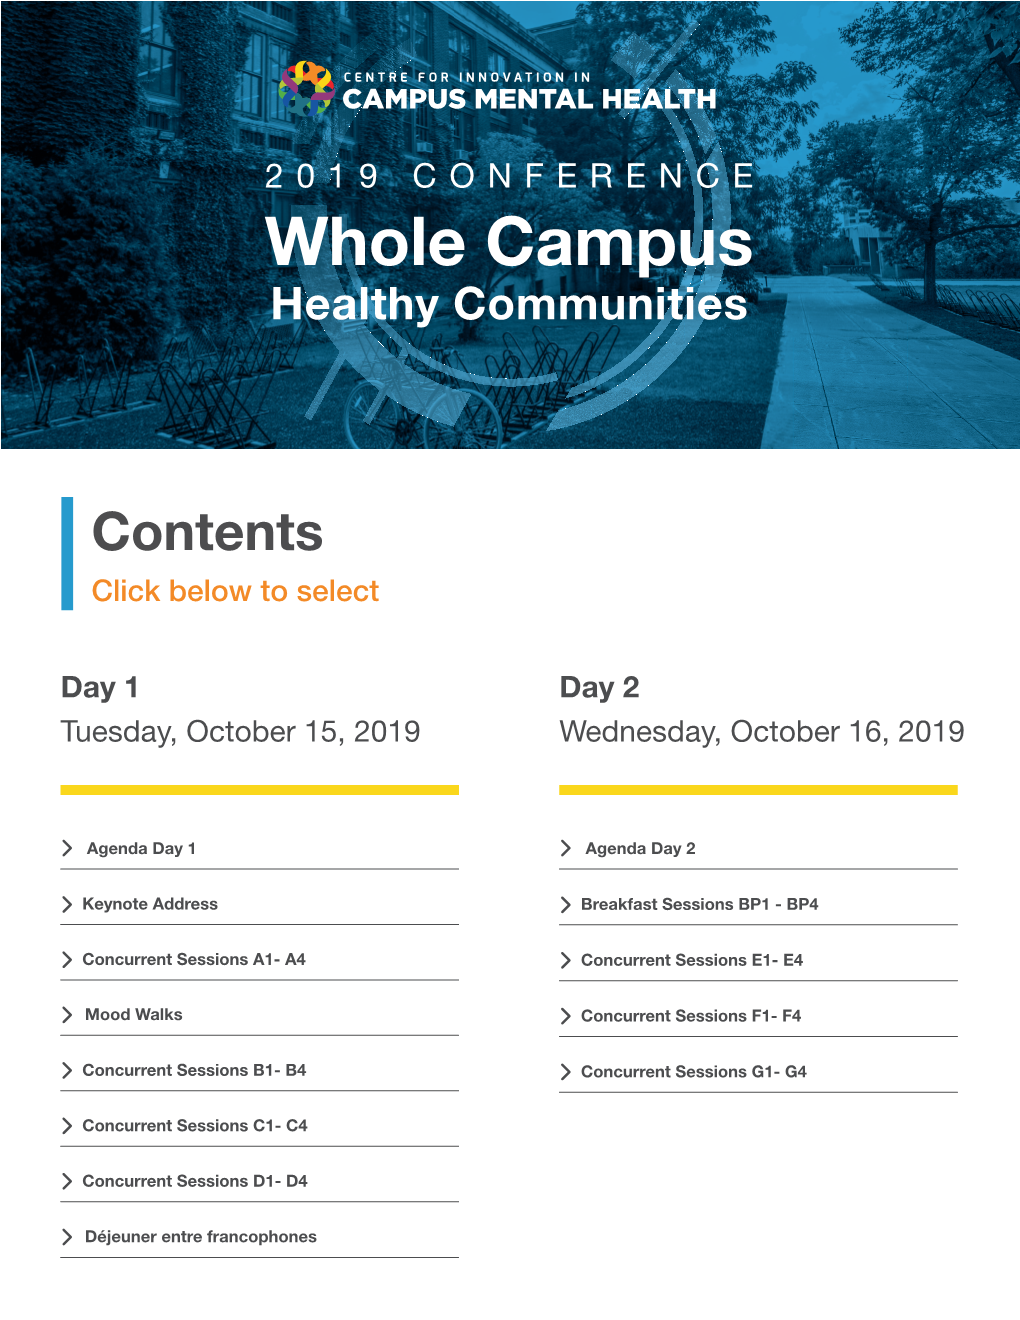 Whole Campus Healthy Communities